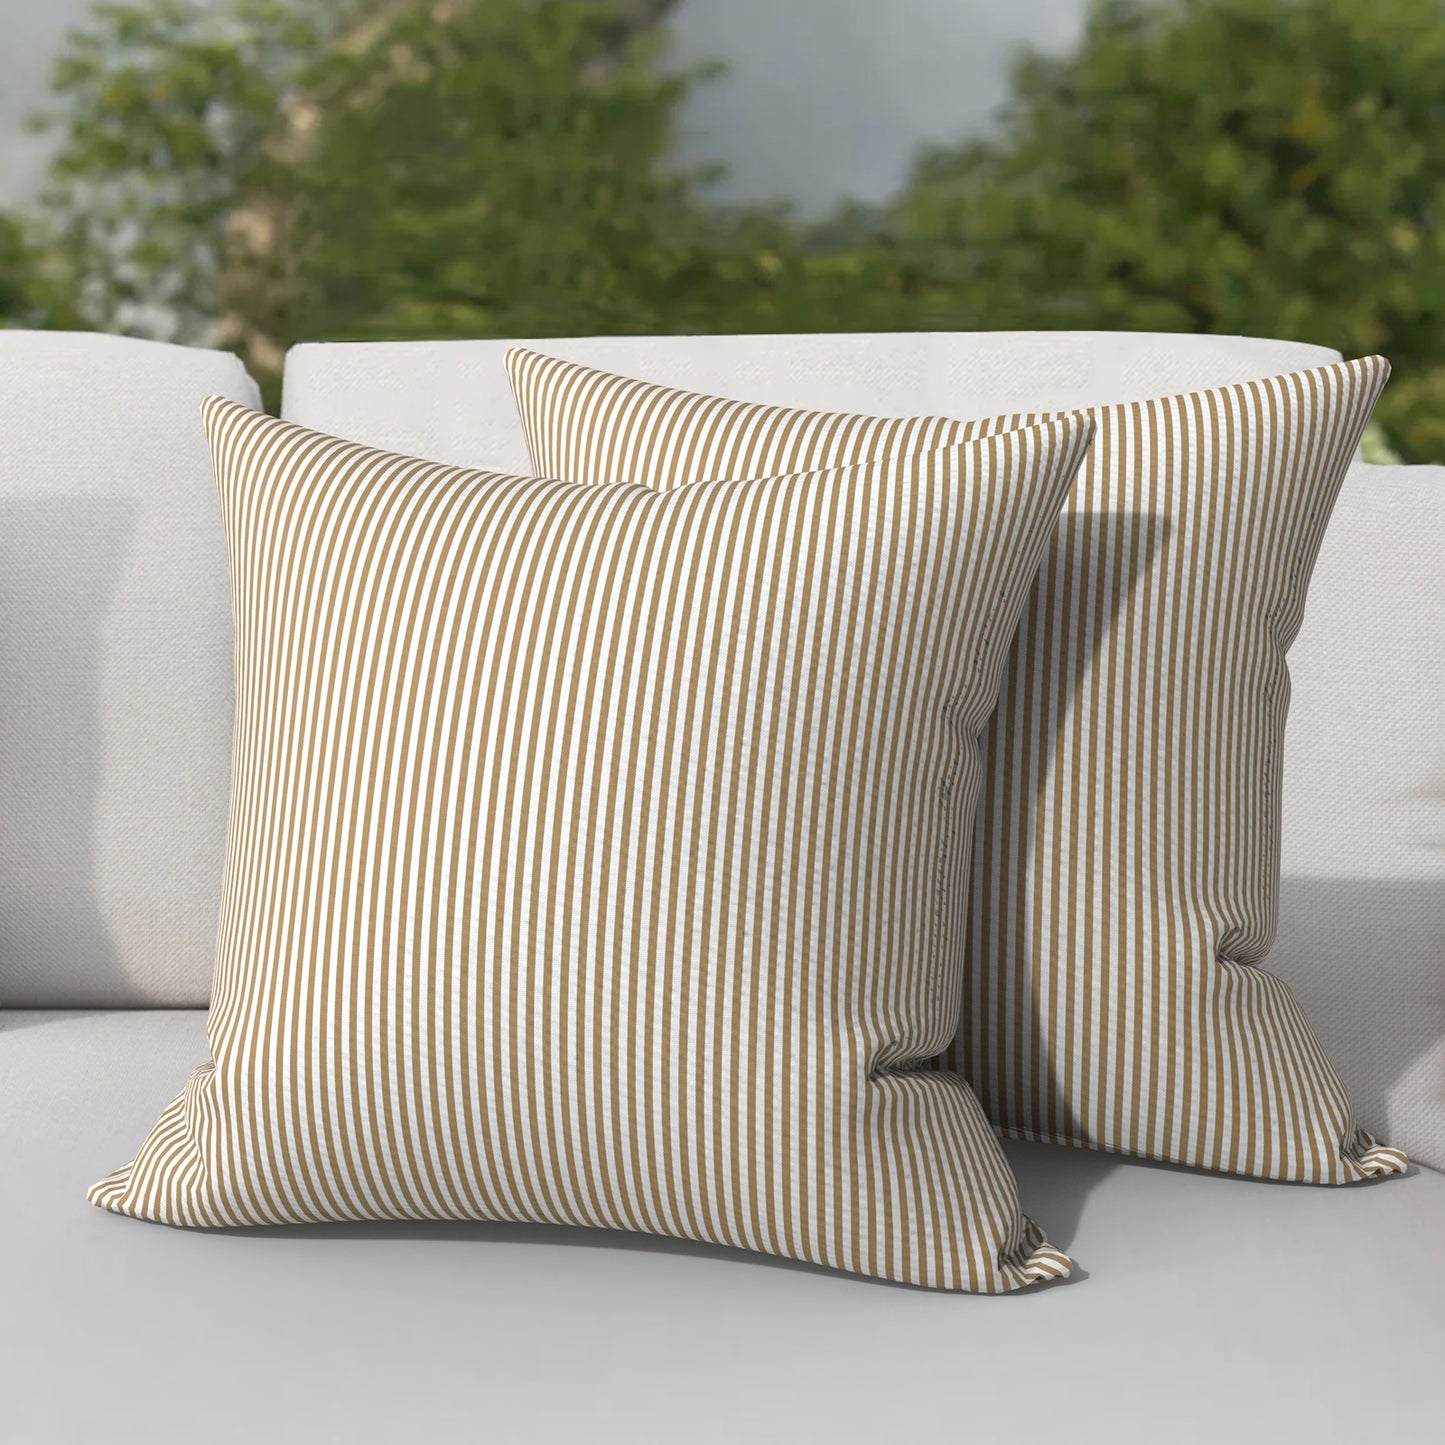 Melody Elephant Patio Throw Pillows with Inners, Fade Resistant Square Pillow Pack of 2, Decorative Garden Cushions for Home, 18x18 Inch, Stripe Beige